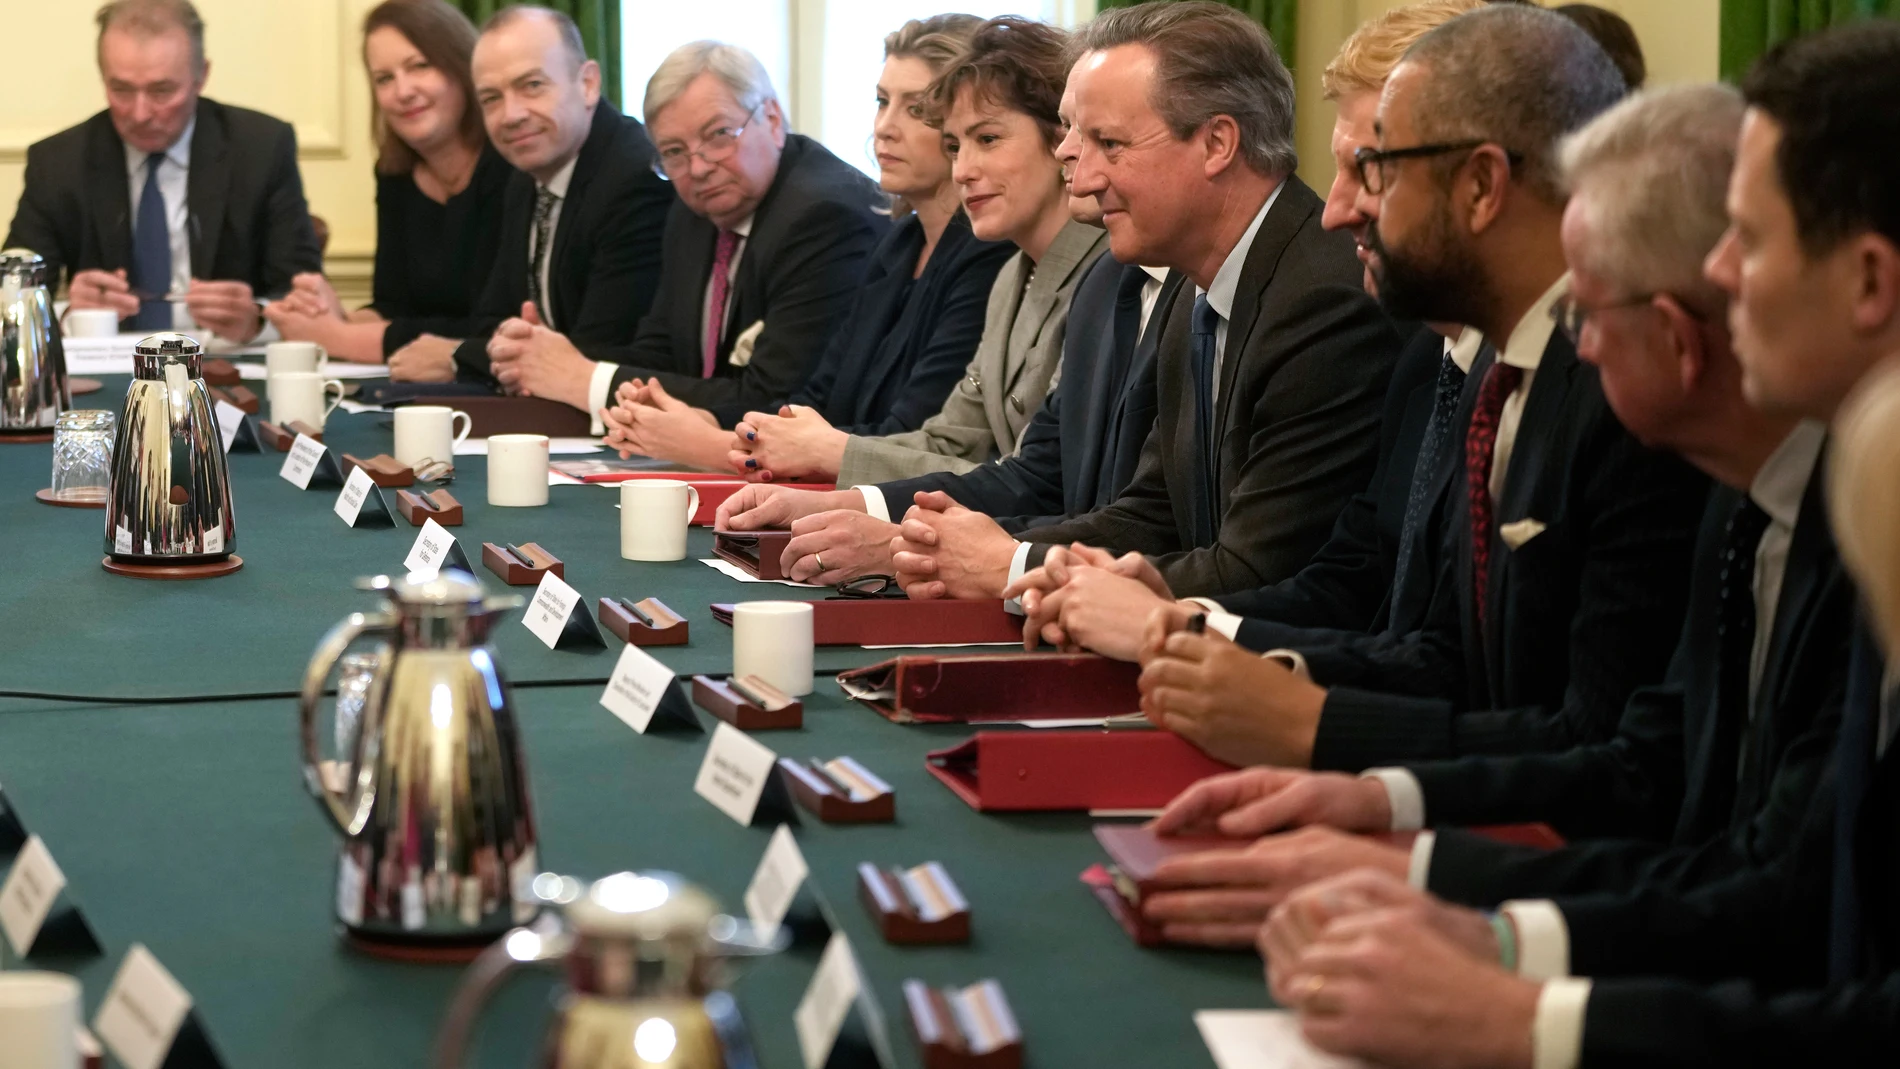 The new British Foreign Secretary David Cameron, 4th right, attends a Cabinet meeting inside 10 Downing Street in London, Tuesday, Nov. 14, 2023. Cameron a former Prime Minister, was brought back into the cabinet during reshuffle by Prime Minister Rishi Sunak, on Monday. (AP Photo/Kin Cheung,Pool)